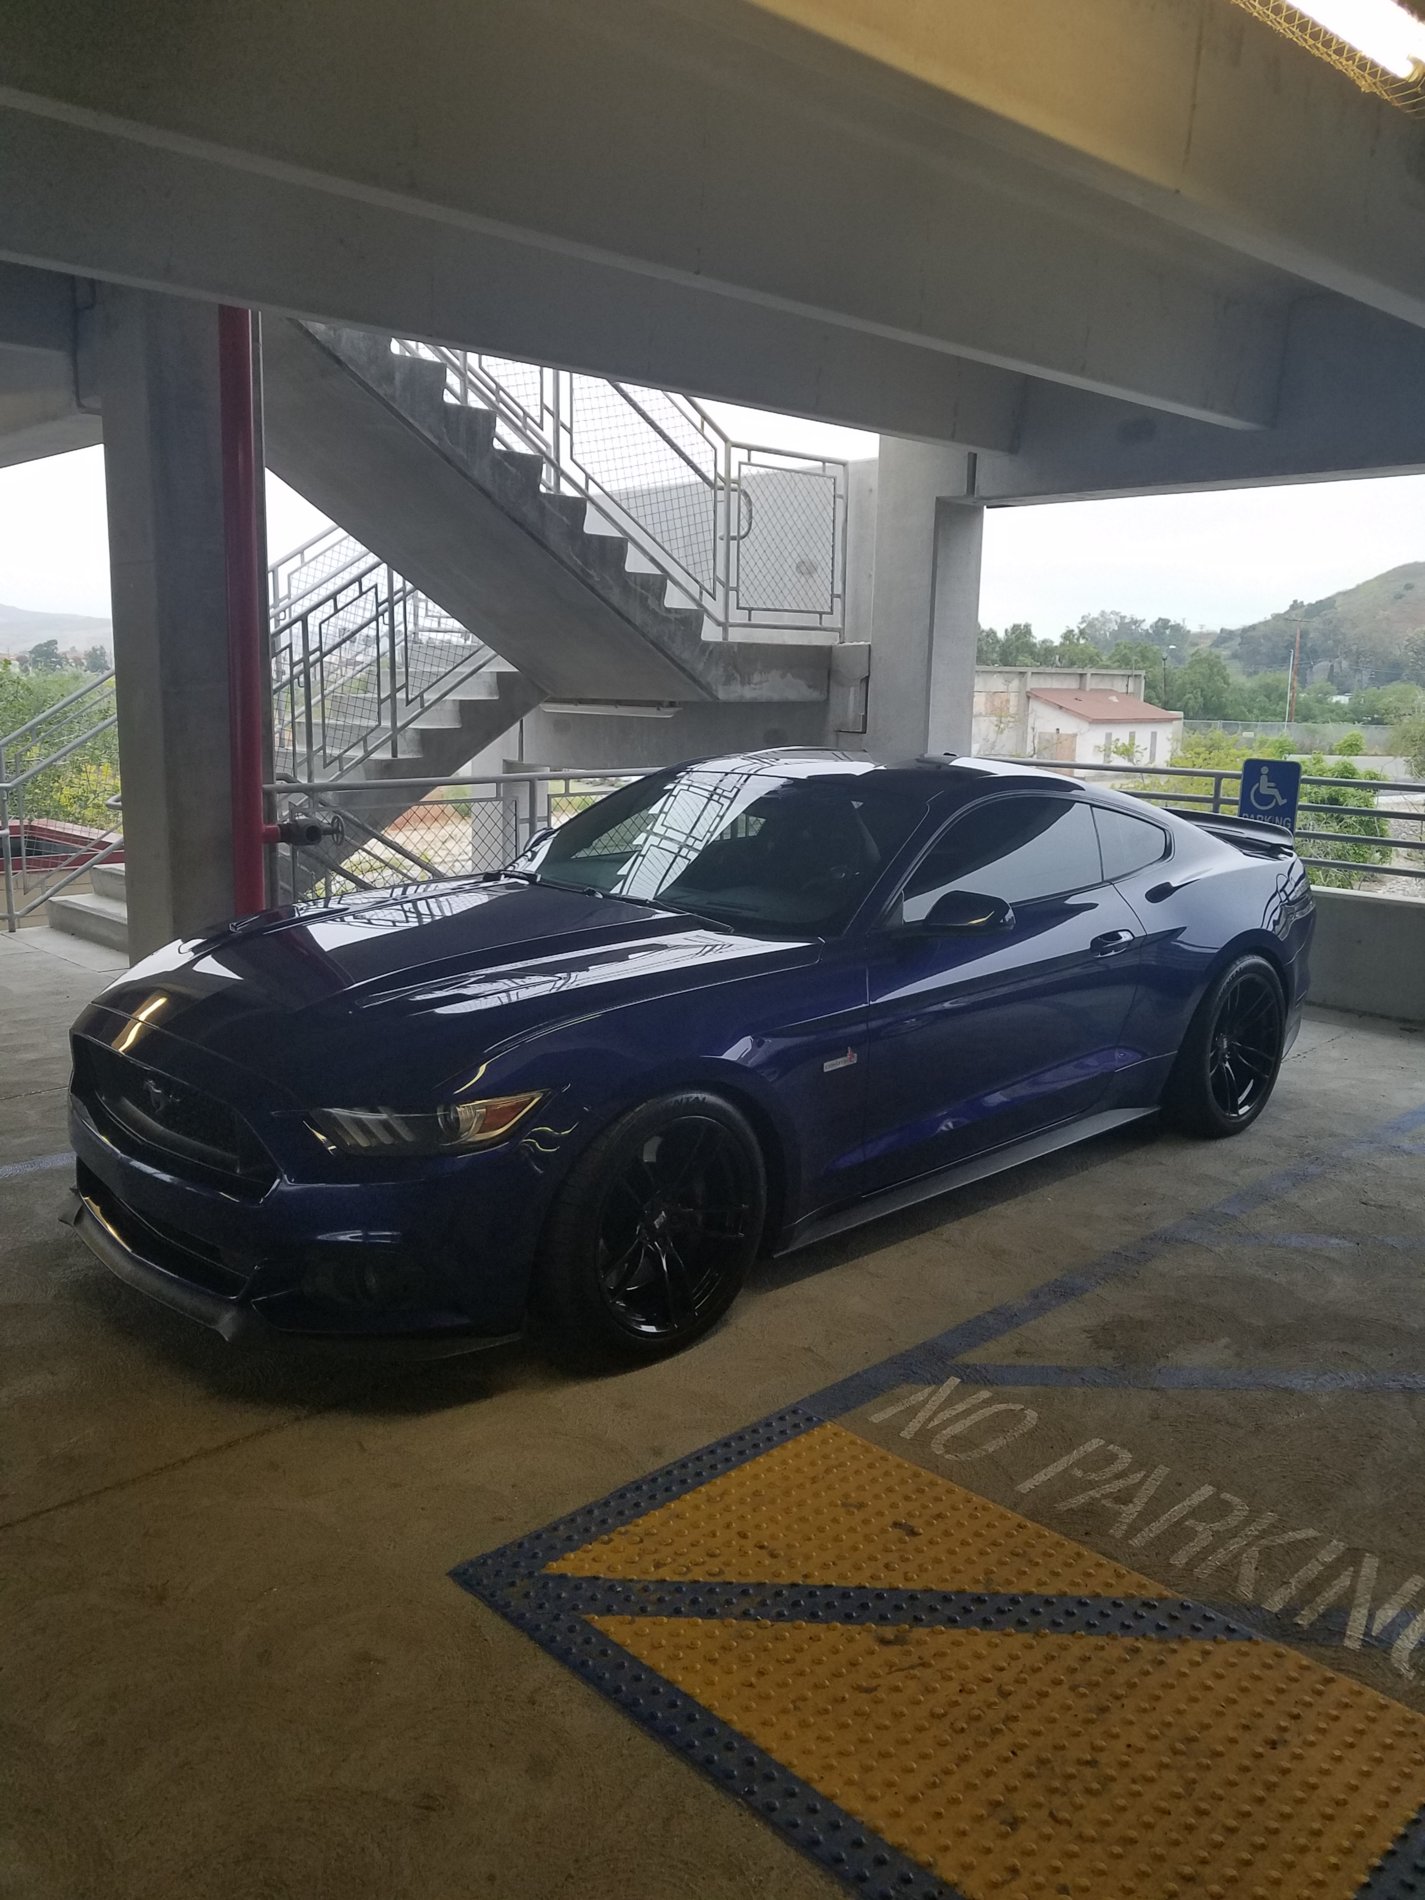 S650 Mustang Post Pictures of Your Car 20190503_071249